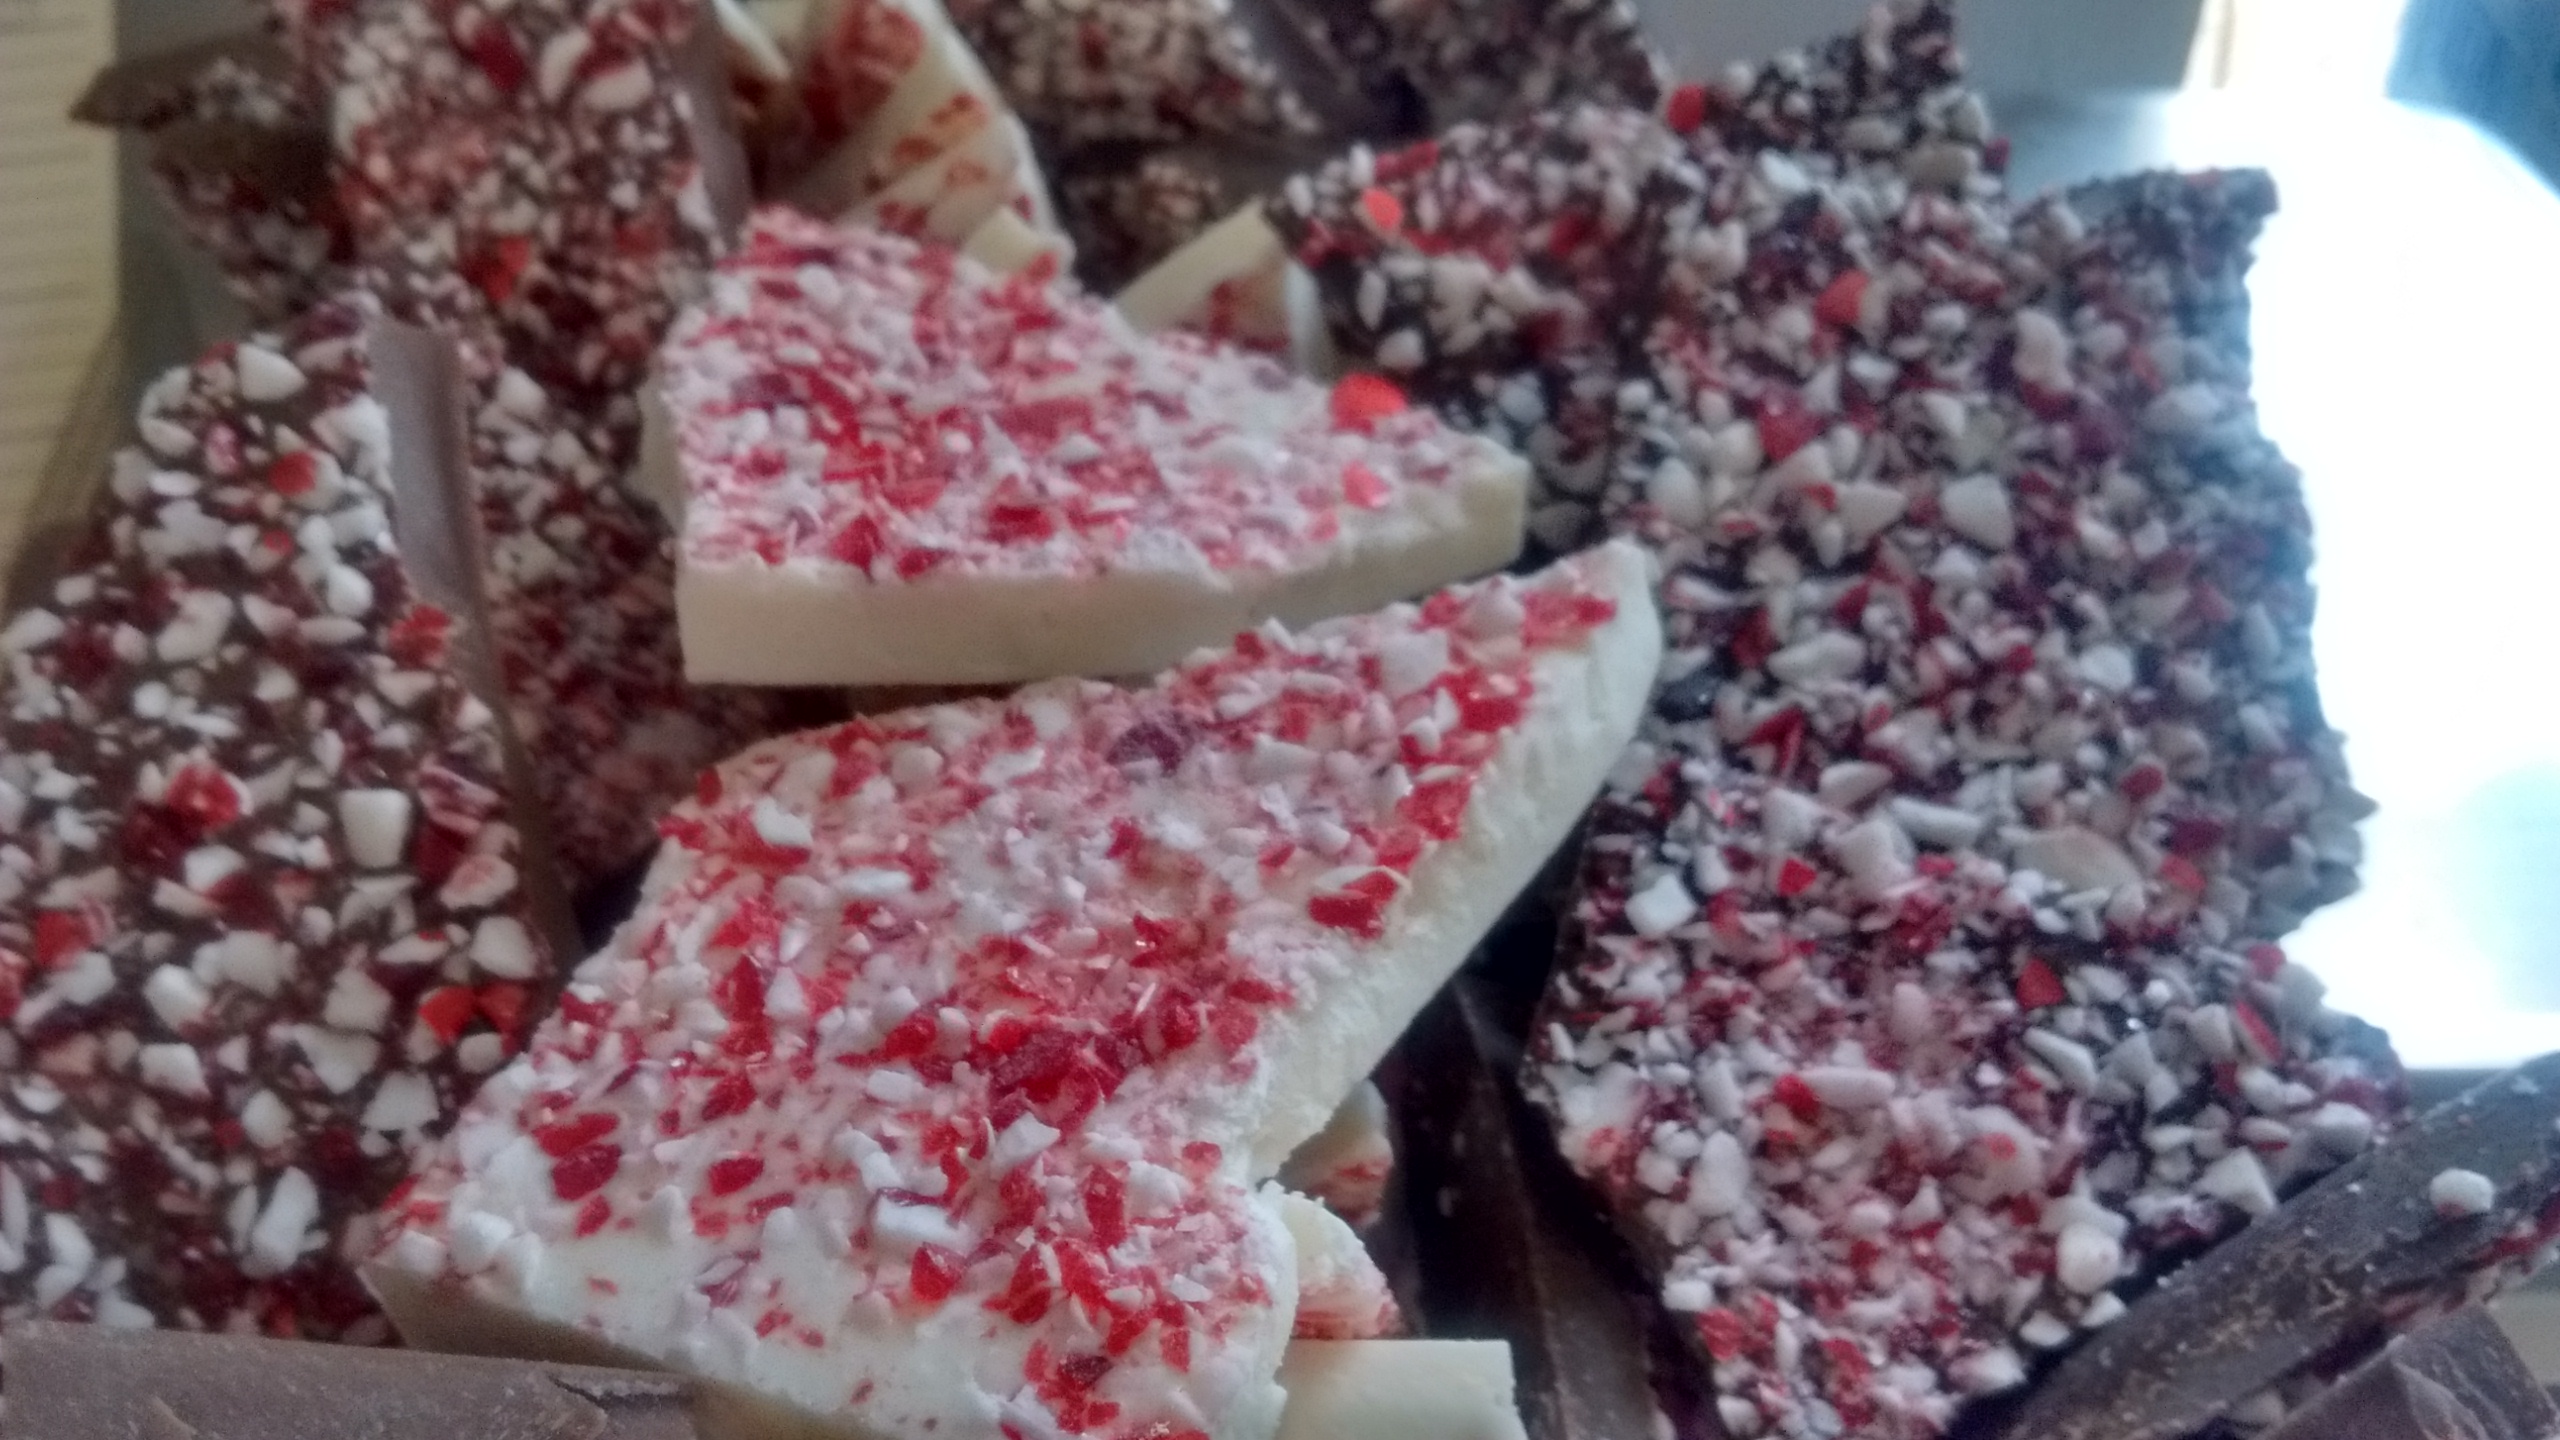 Peppermint Bark (homemade) sold by the weight